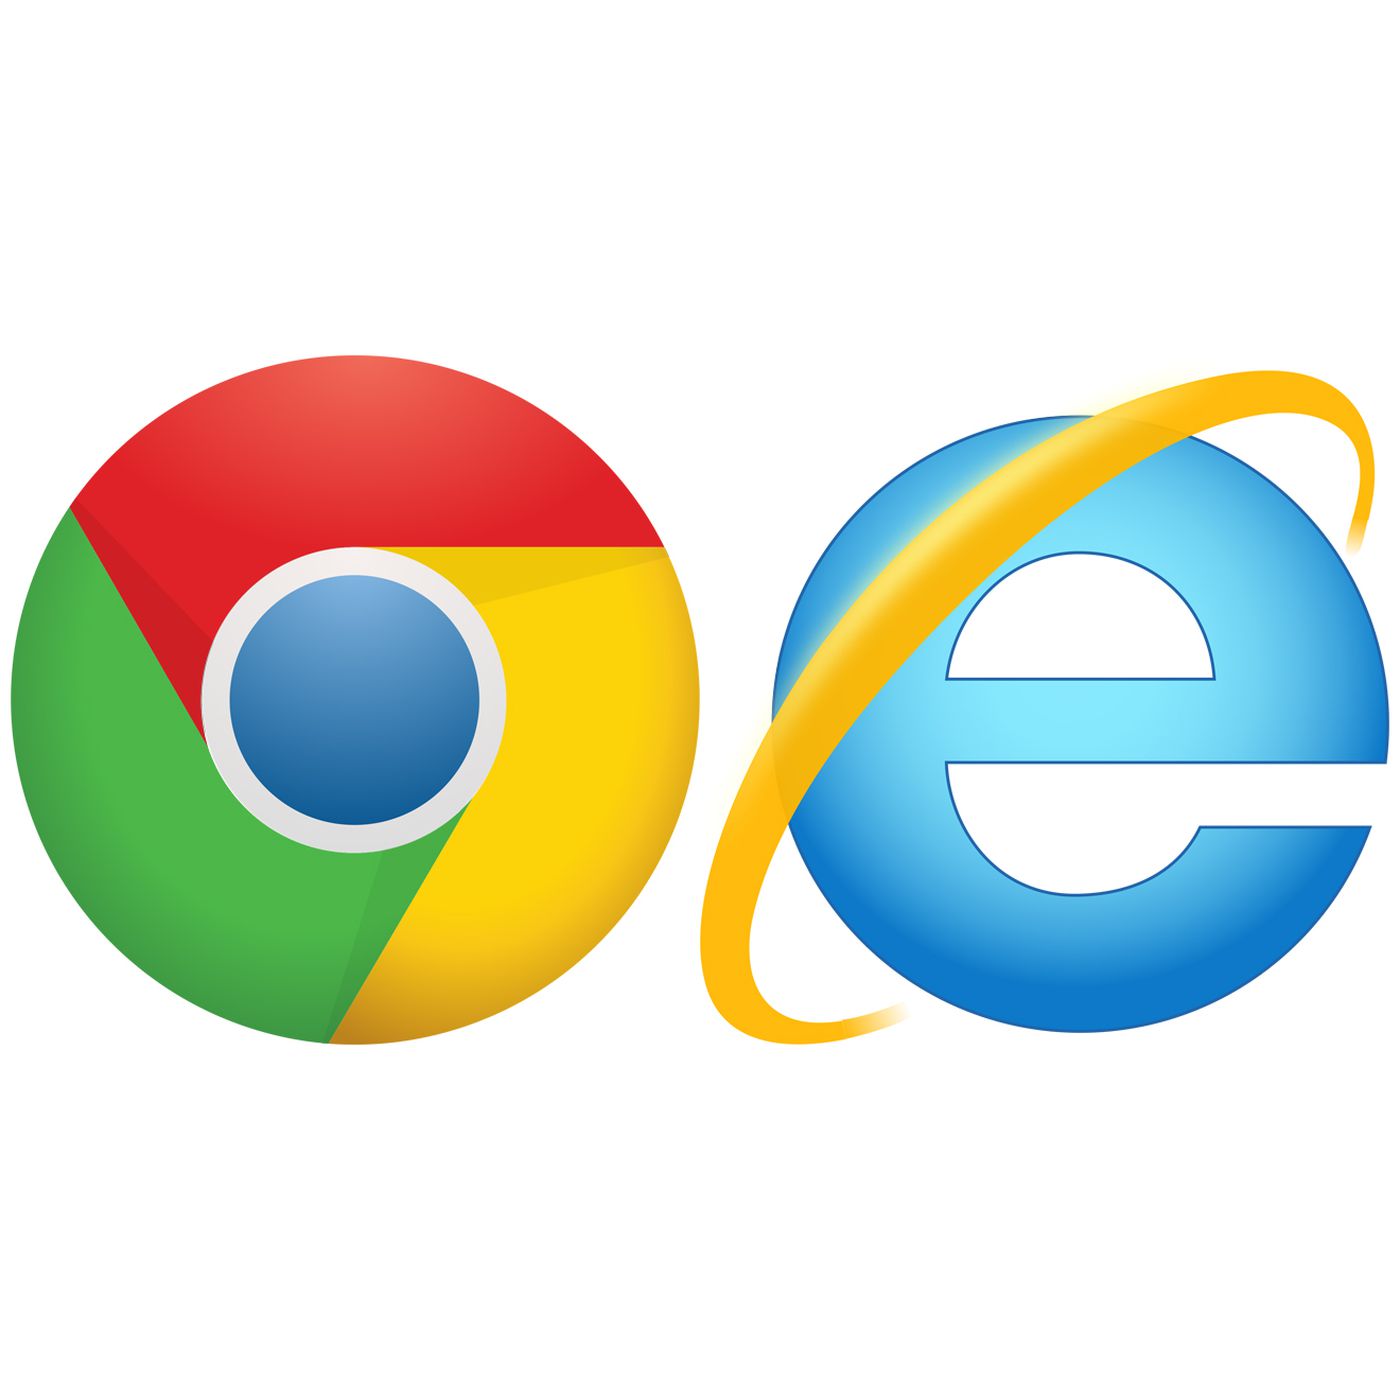 Internet explorer will not download anything to go